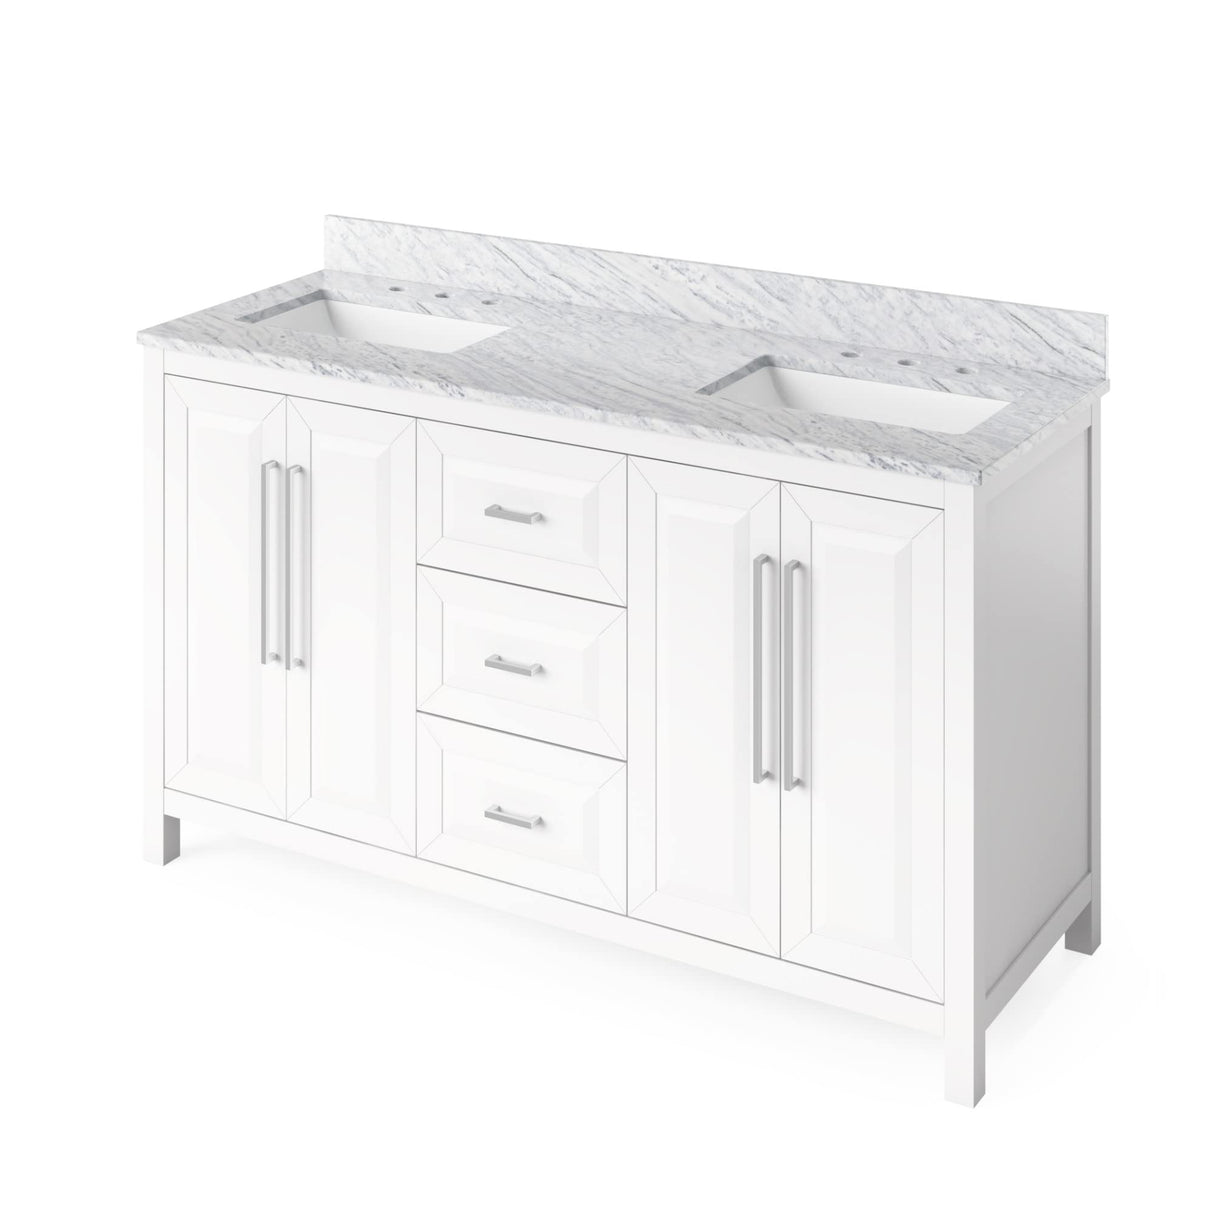 Jeffrey Alexander VKITCAD60WHSGR 60" White Cade Vanity, double bowl, Steel Grey Cultured Marble Vanity Top, undermount rectangle bowl